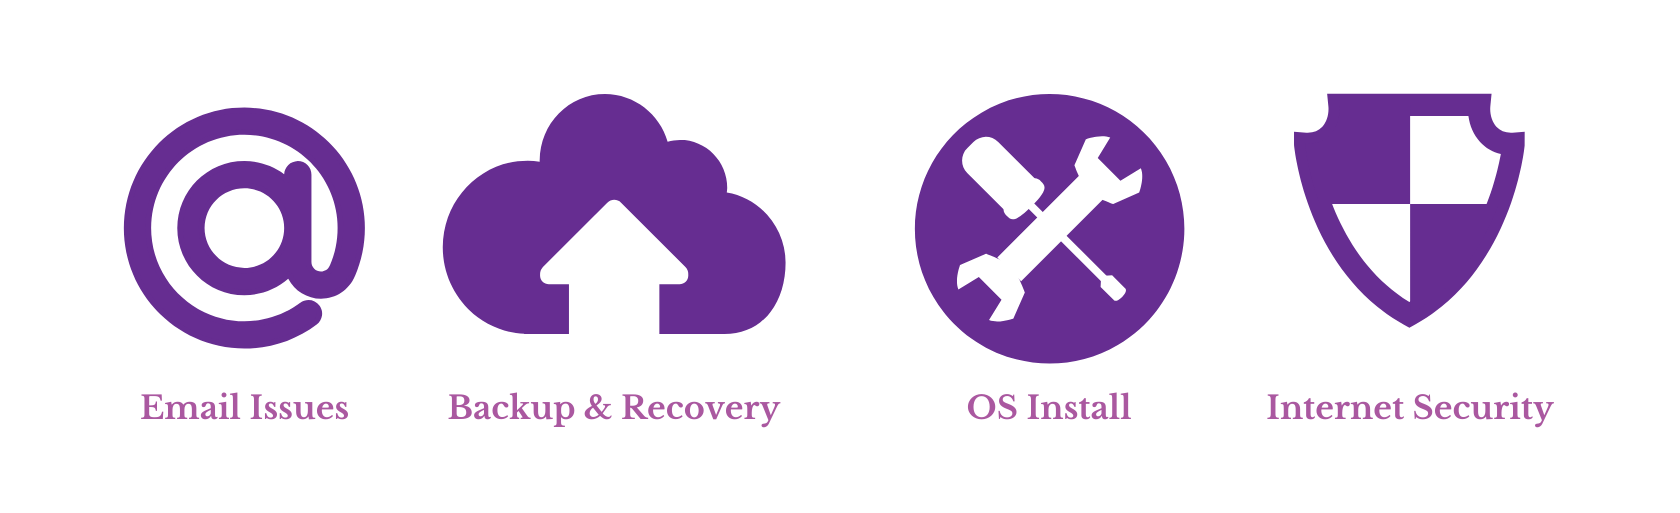 Oneb Technologies Ltd IT Support Specialists - Email Issues Backup & Recovery OS Install Internet Security